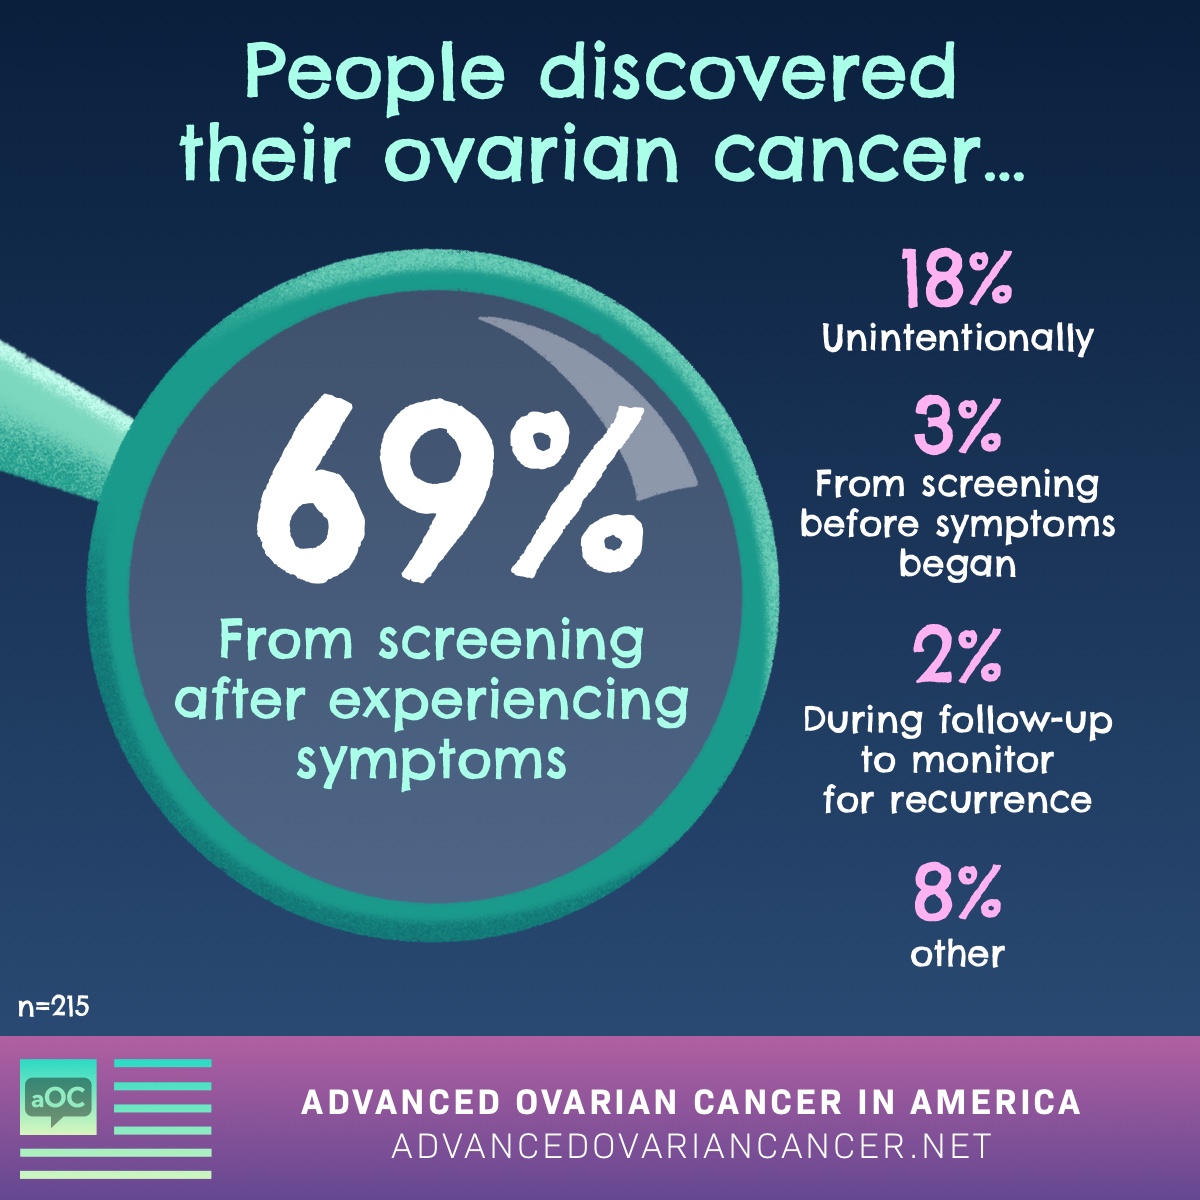 People discovered their ovarian cancer from screening after experiencing symptoms (69%), unintentionally (18%), from screening before symptoms began (3%), during follow-up to monitor for recurrence (2%), other (8%)